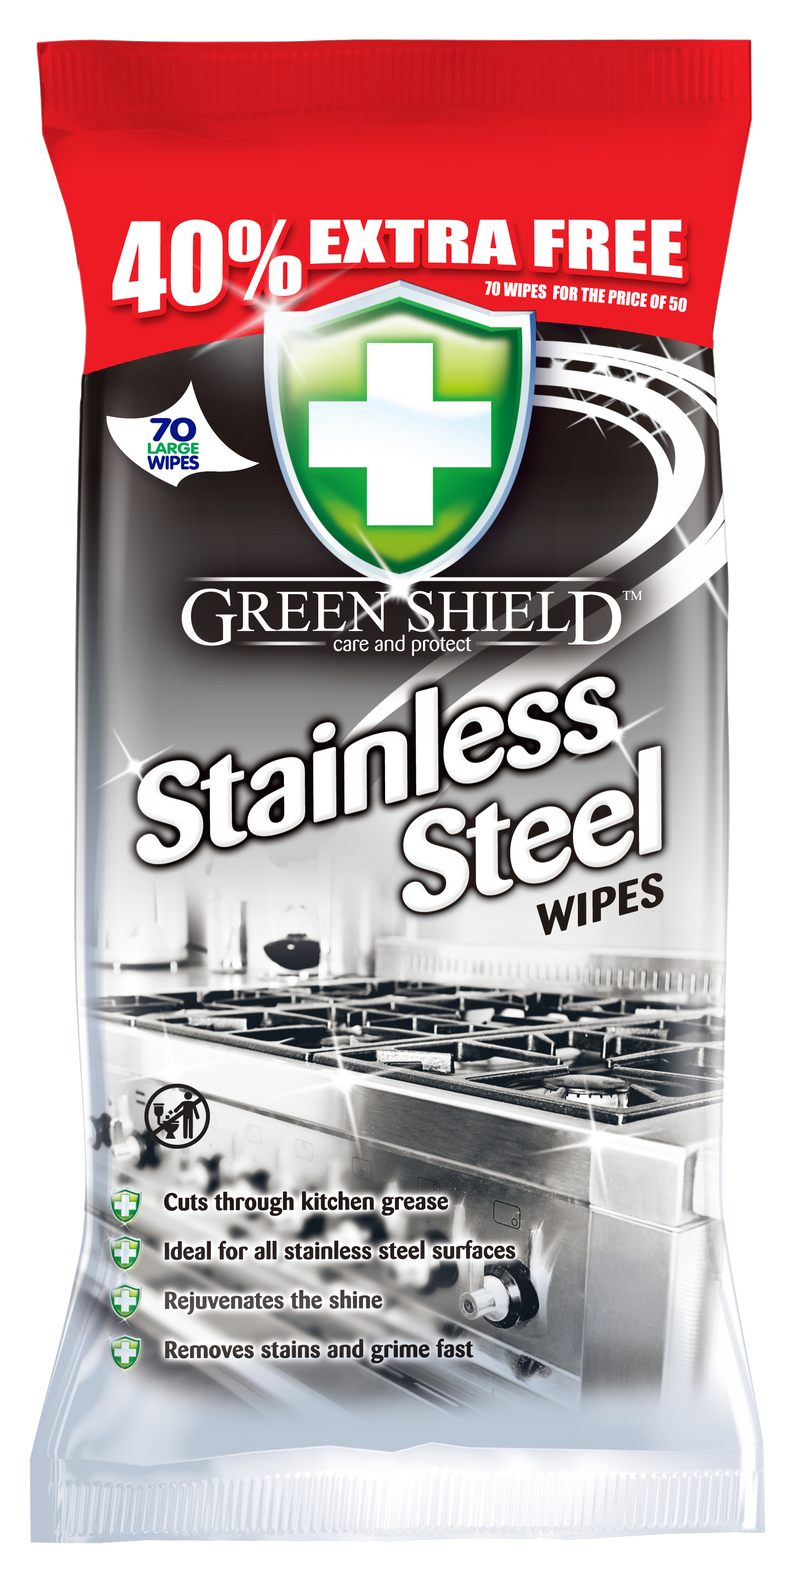 Greenshield Stainless Steel Wipes 70s